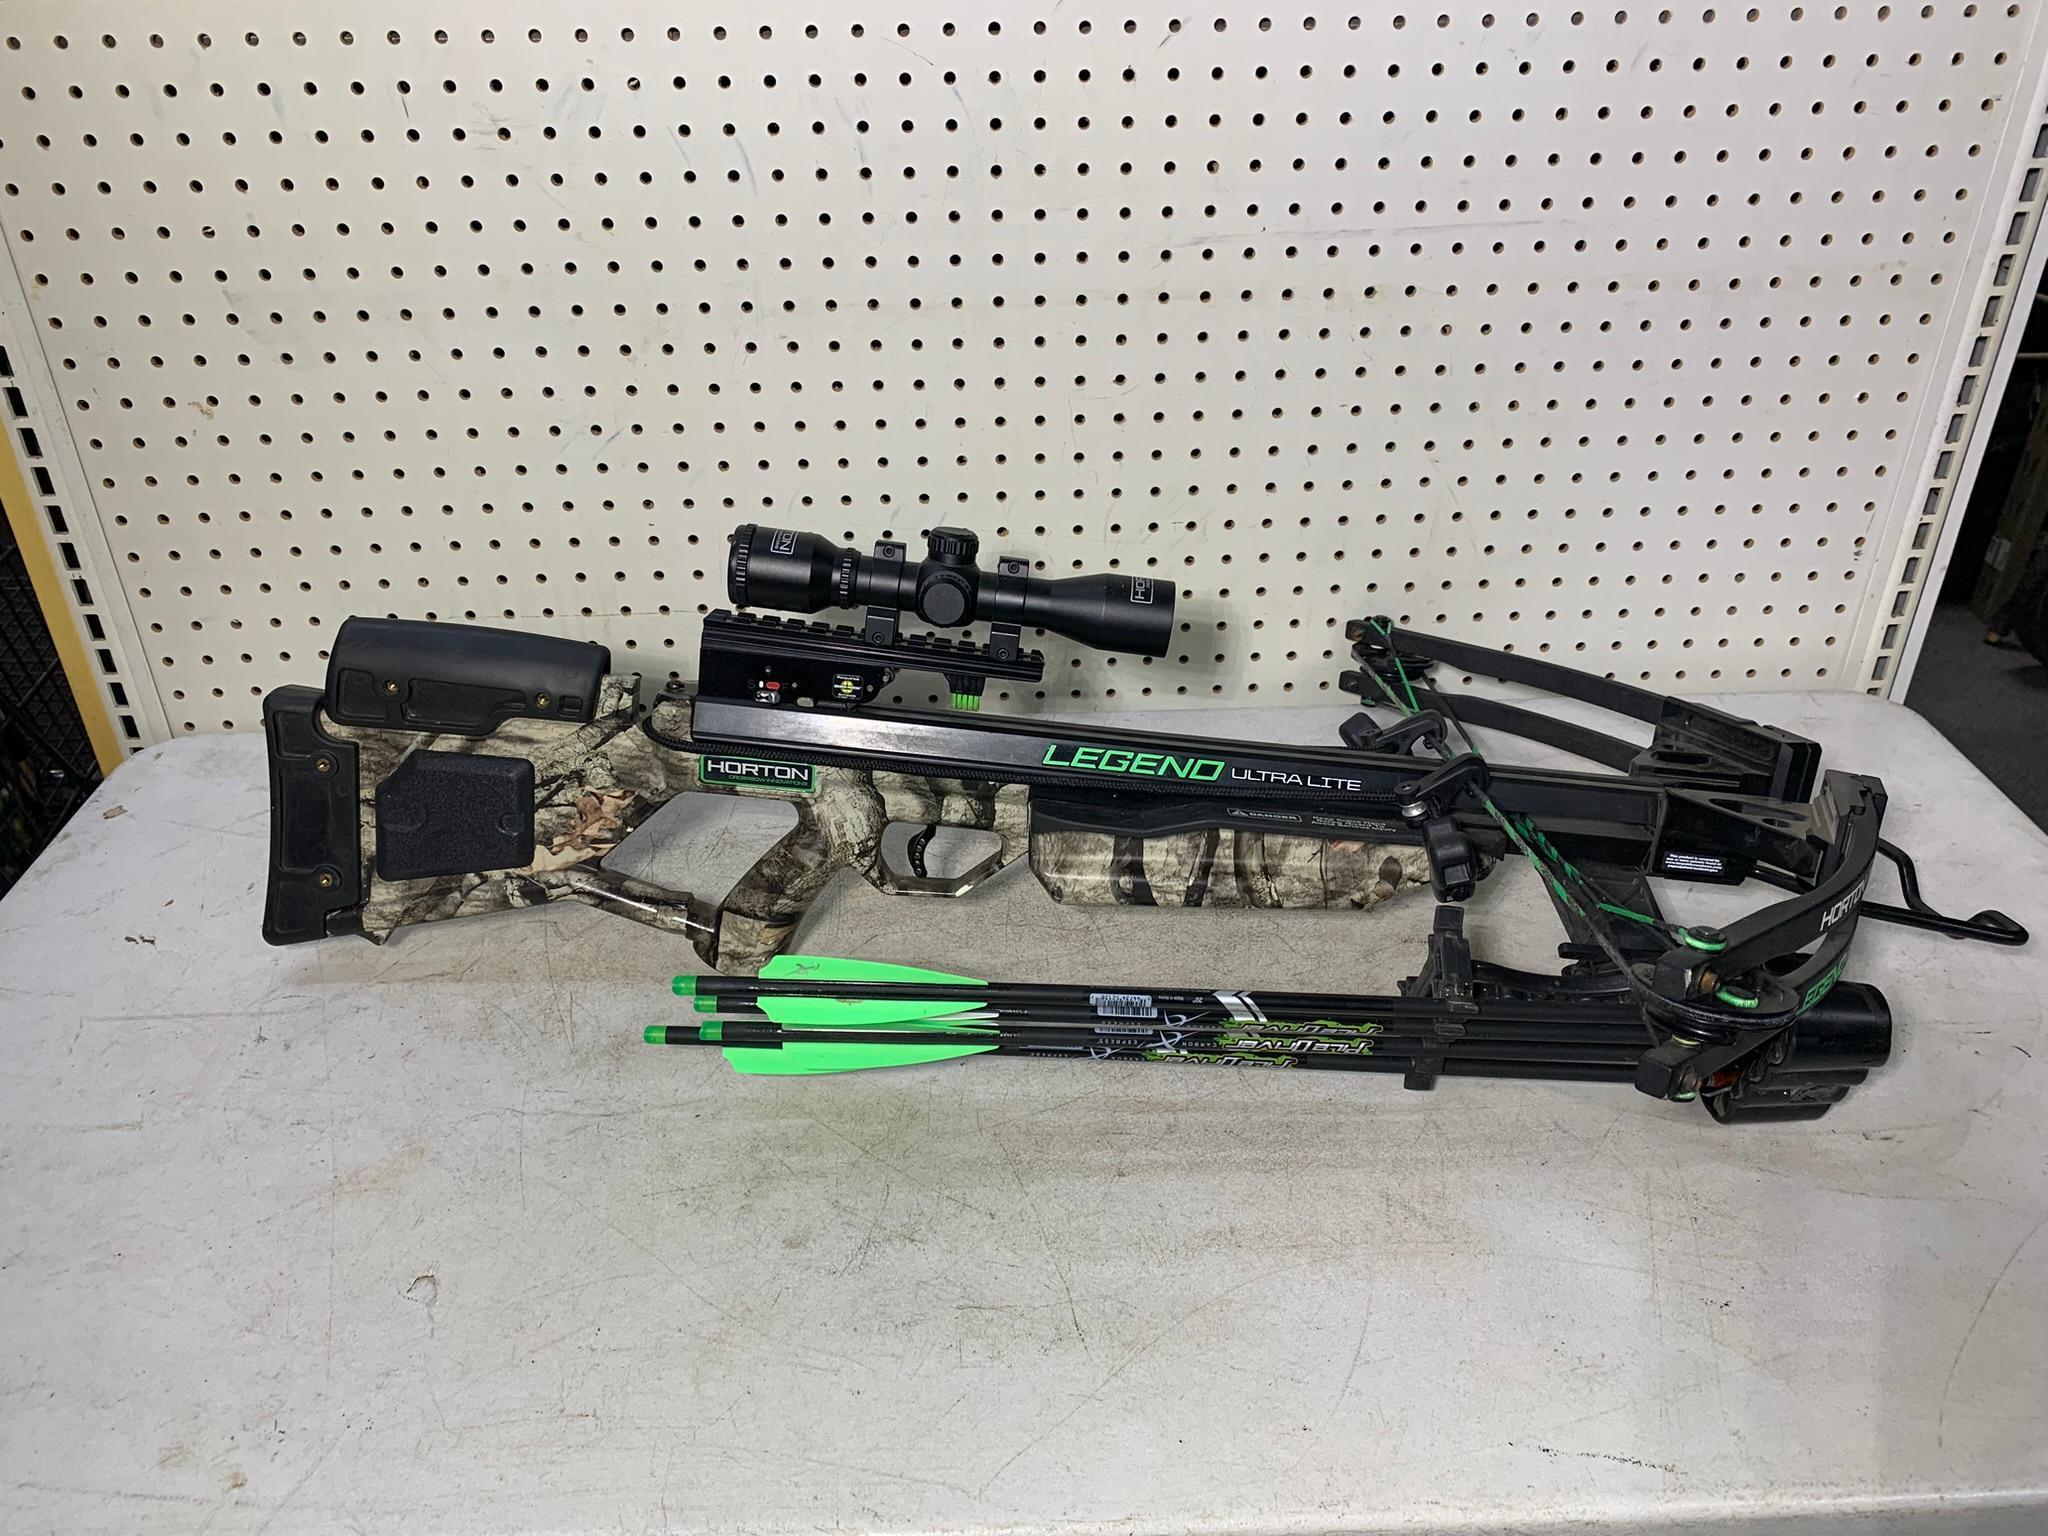 Horton Legend Ultra Lite Crossbow with Horton Scope and Arrow Accessories and Soft Case